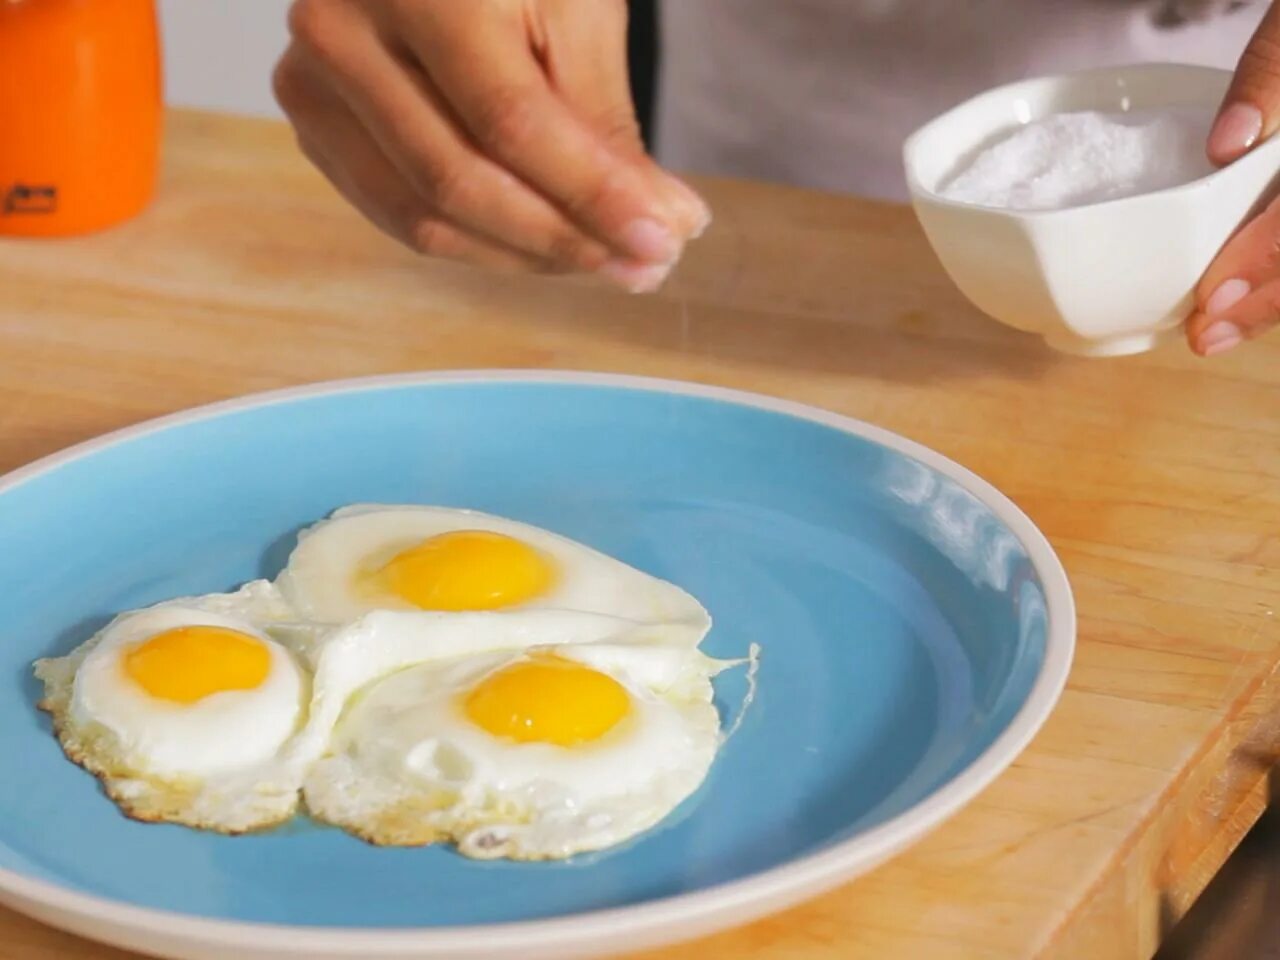 Cooked egg. Яичница овер ИЗИ. Fried Eggs over easy. How to make Fried Eggs. Over яйцо.